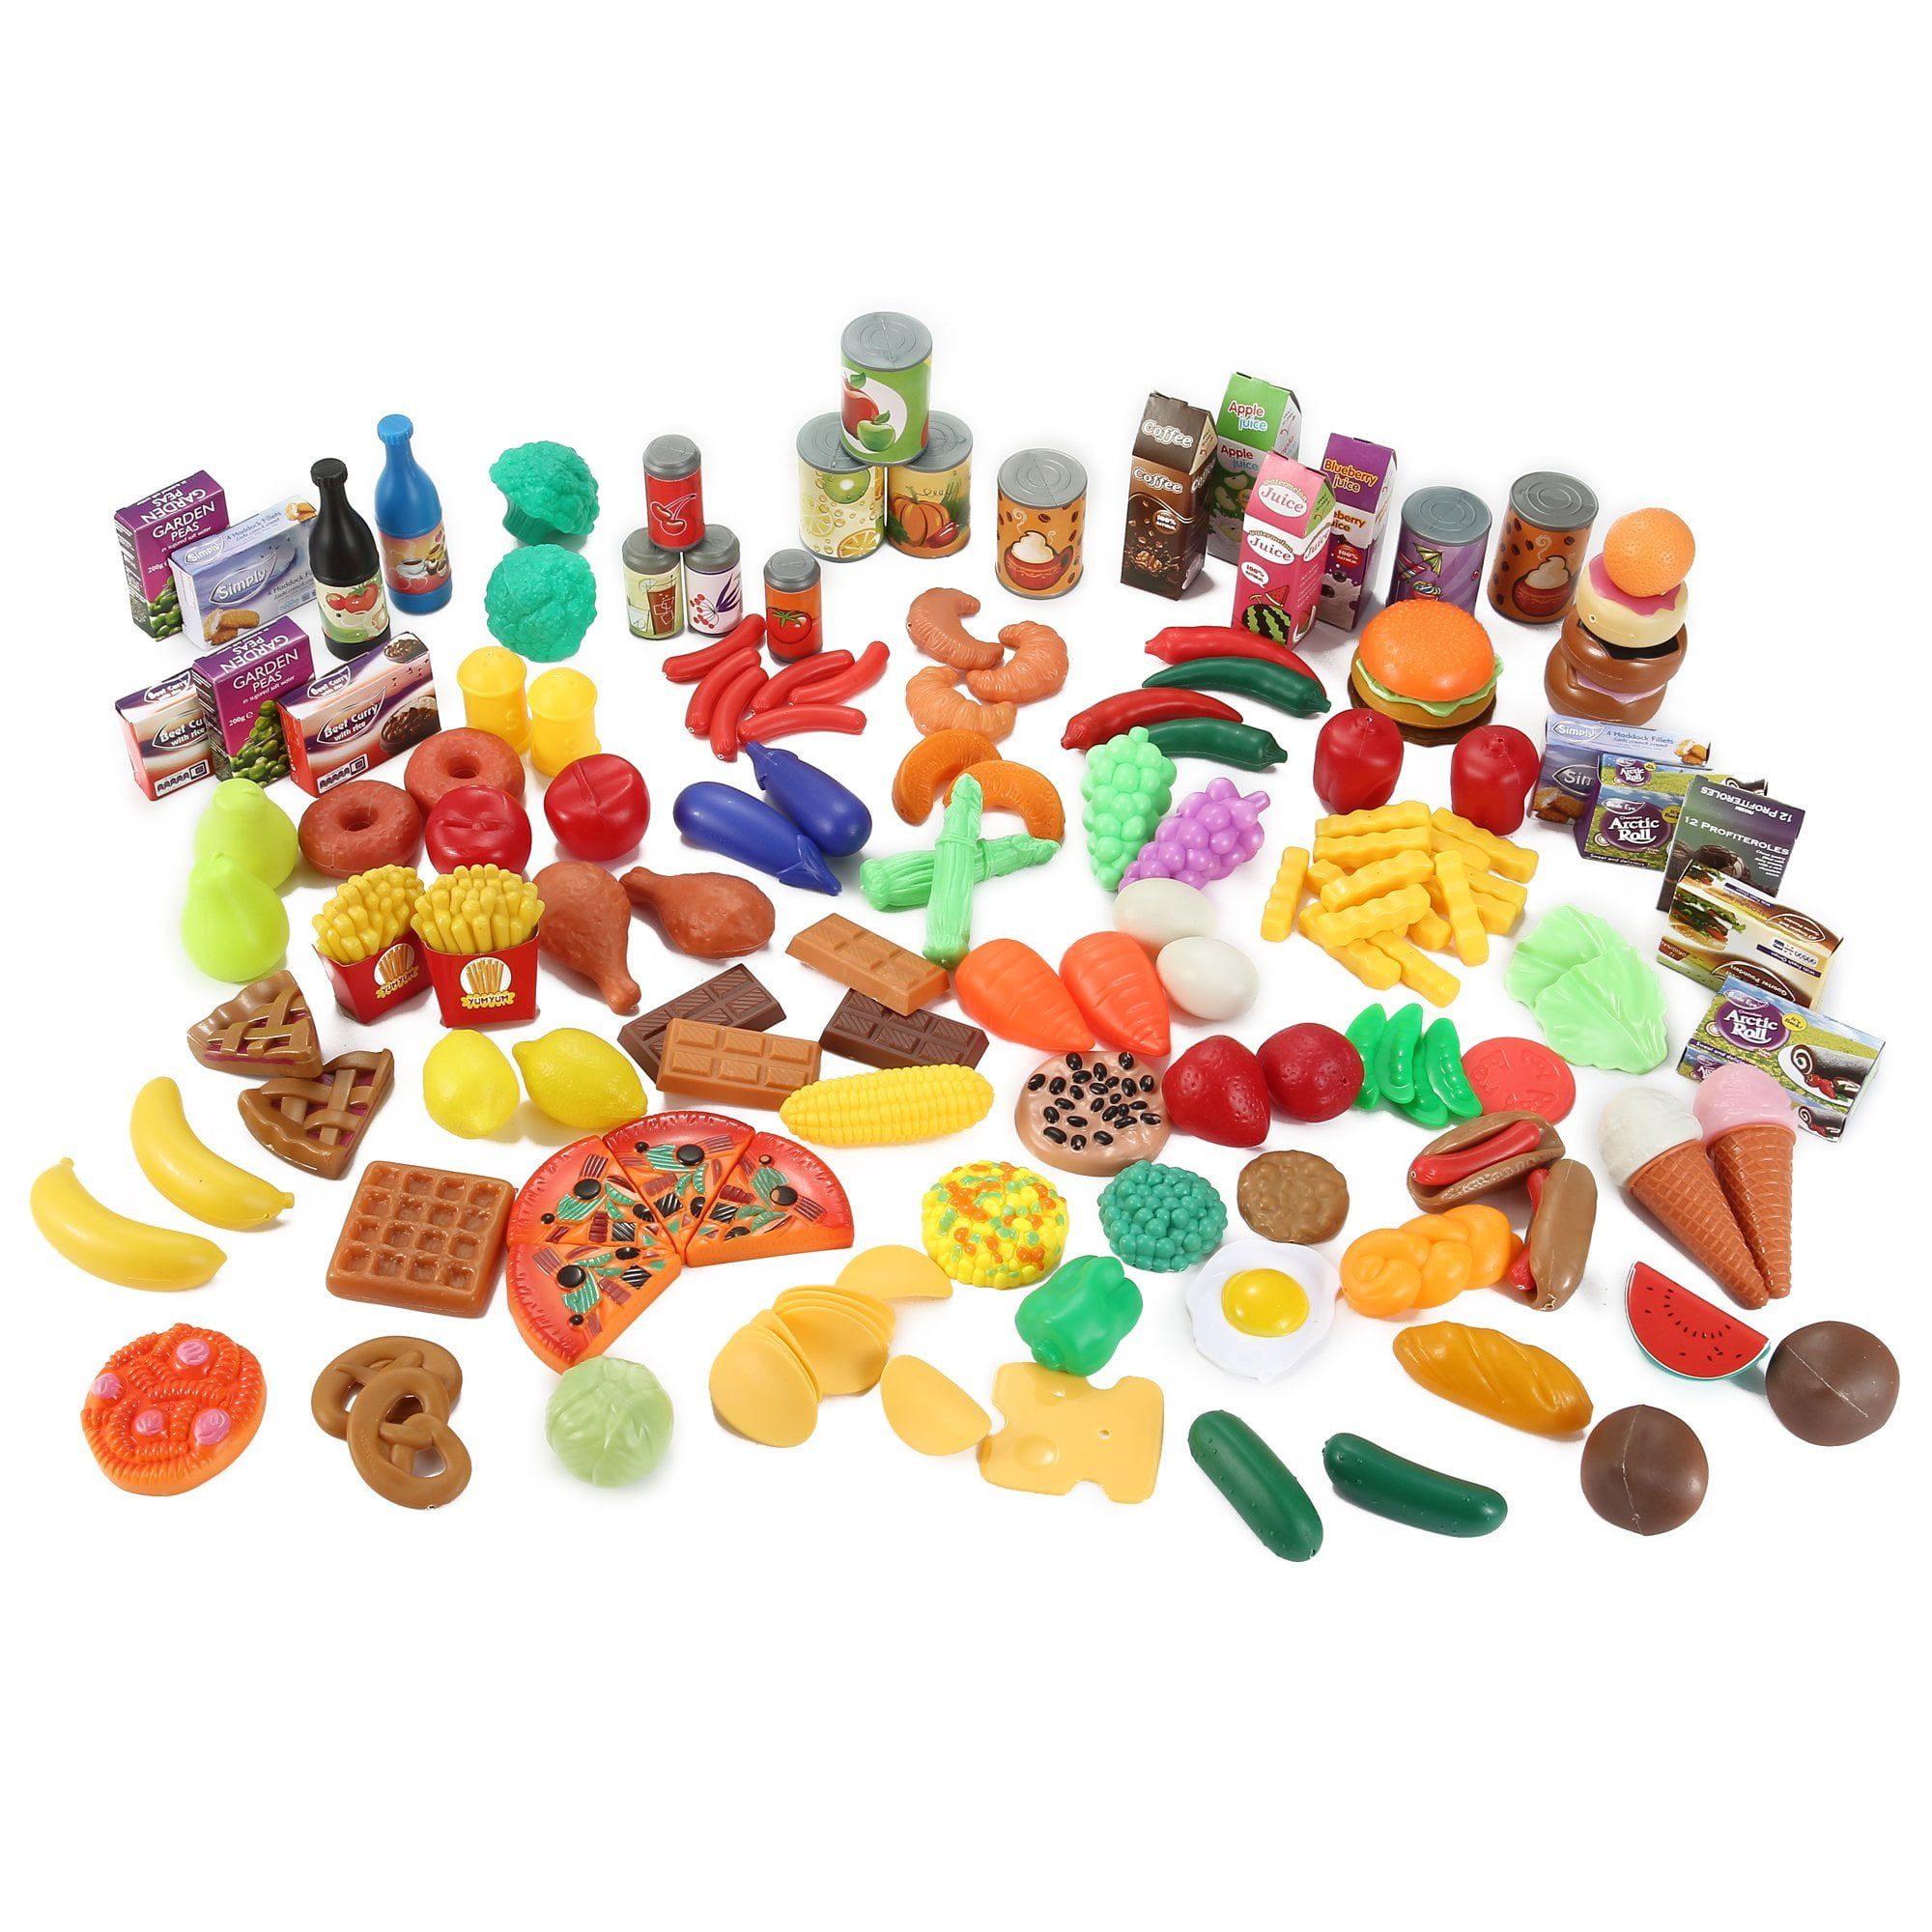 Liberty Imports 150 Piece Super Market Grocery Play Food Assortment Toy... 